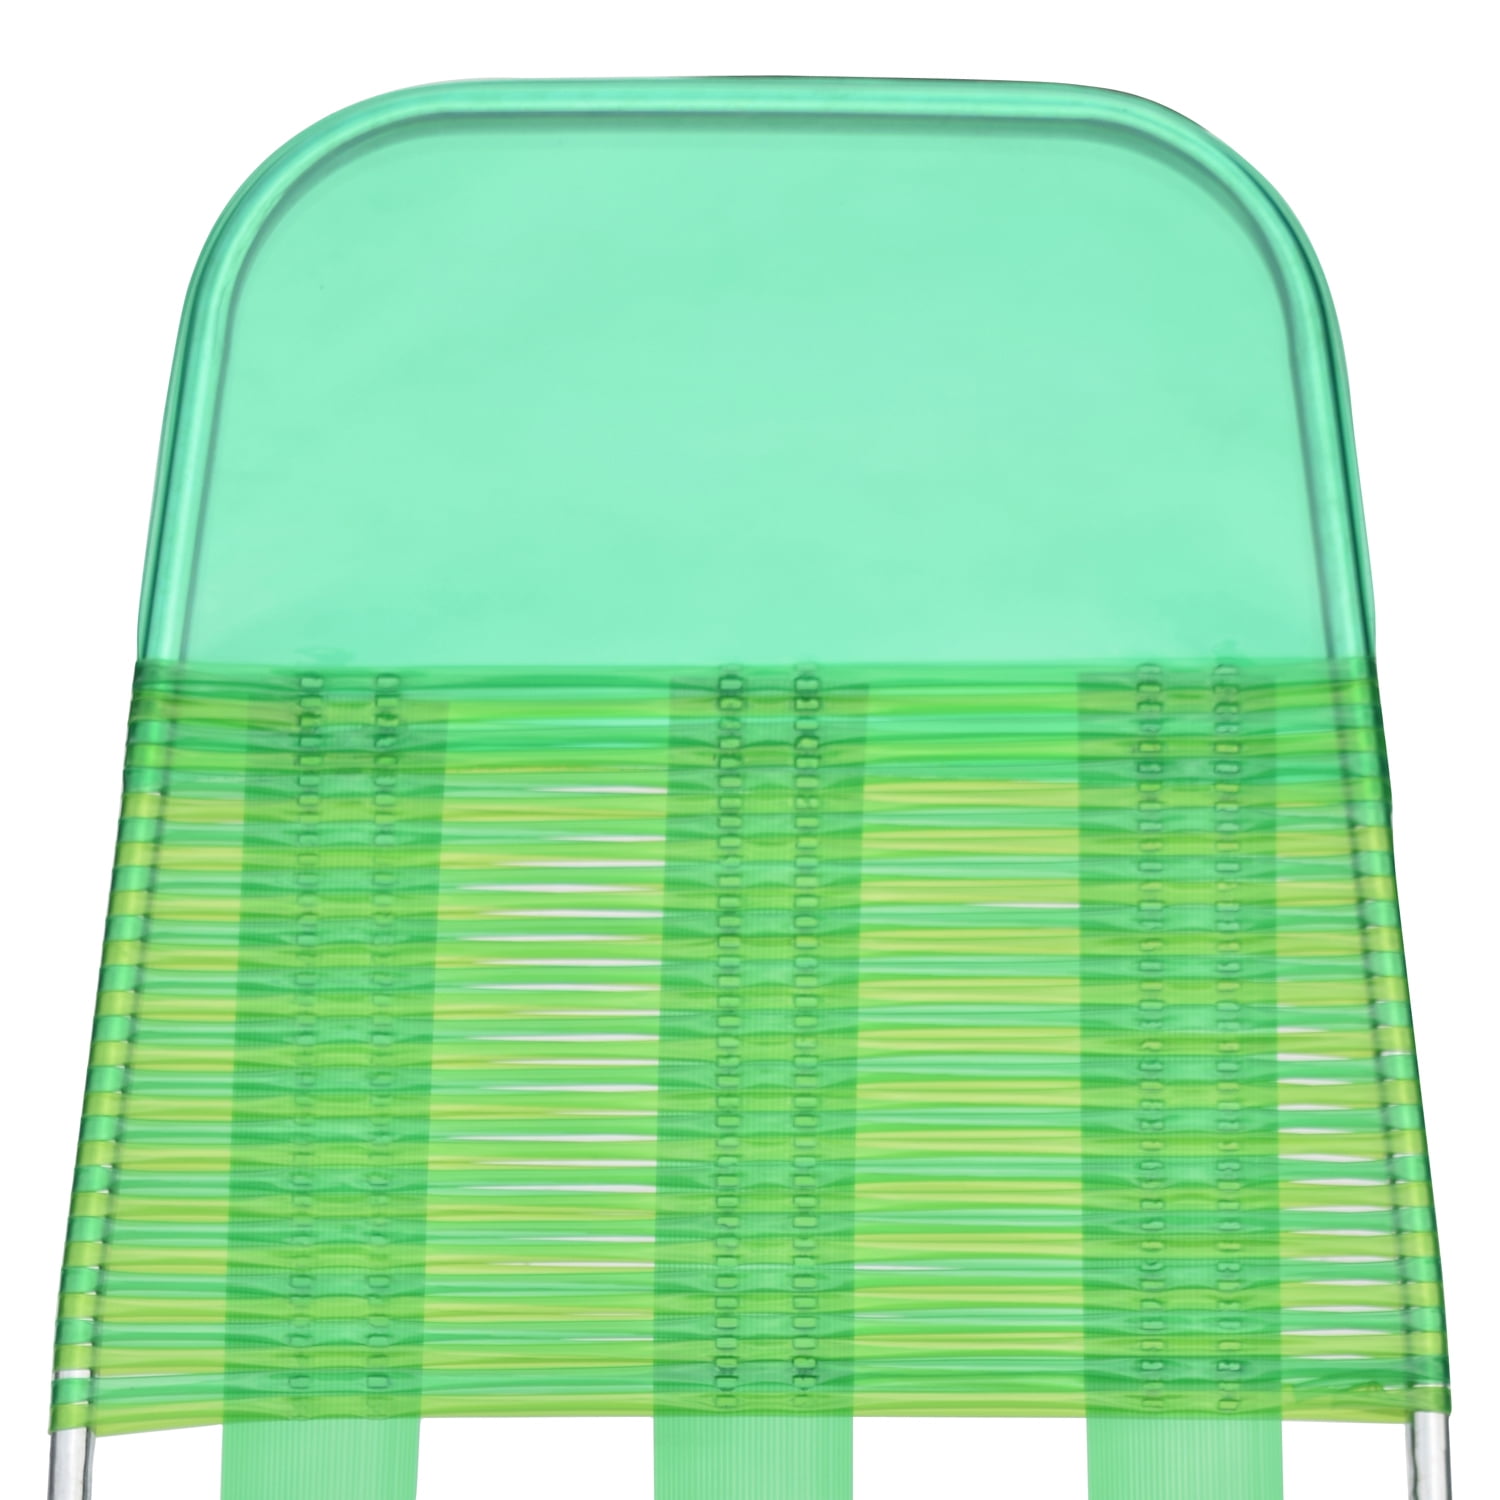 folding jelly chaise lounge